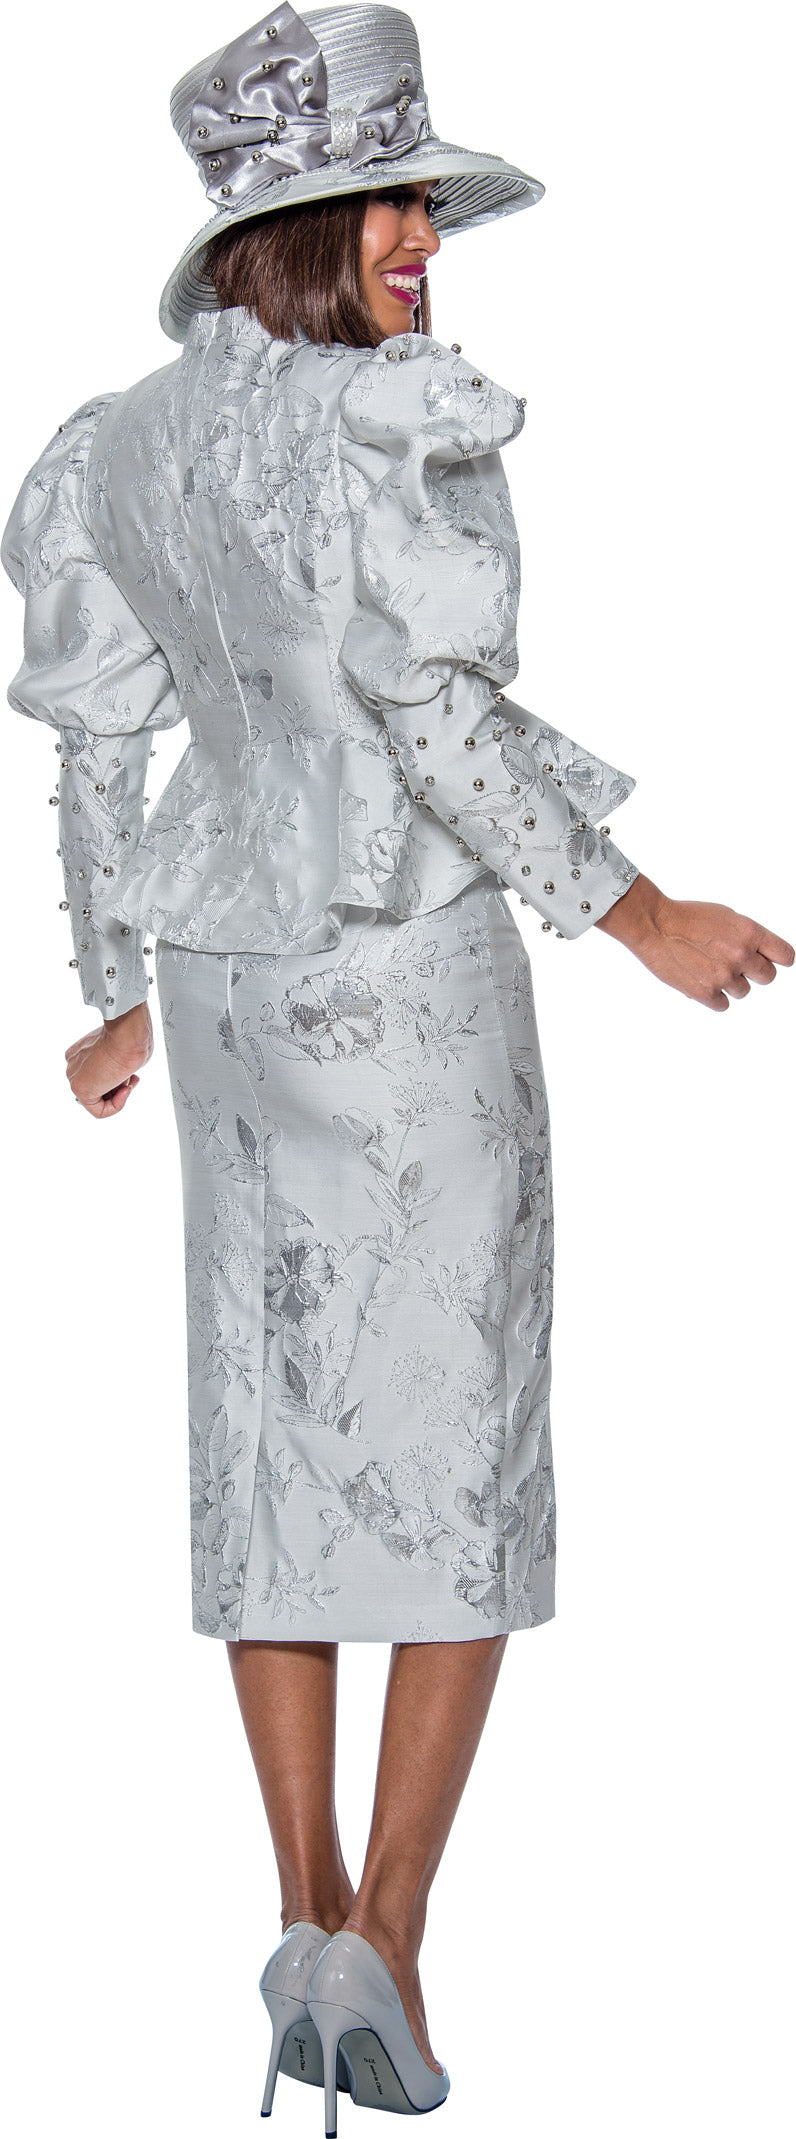 Divine Queen - DQ2092 - 2PC Embellished Jacquard Skirt Suit